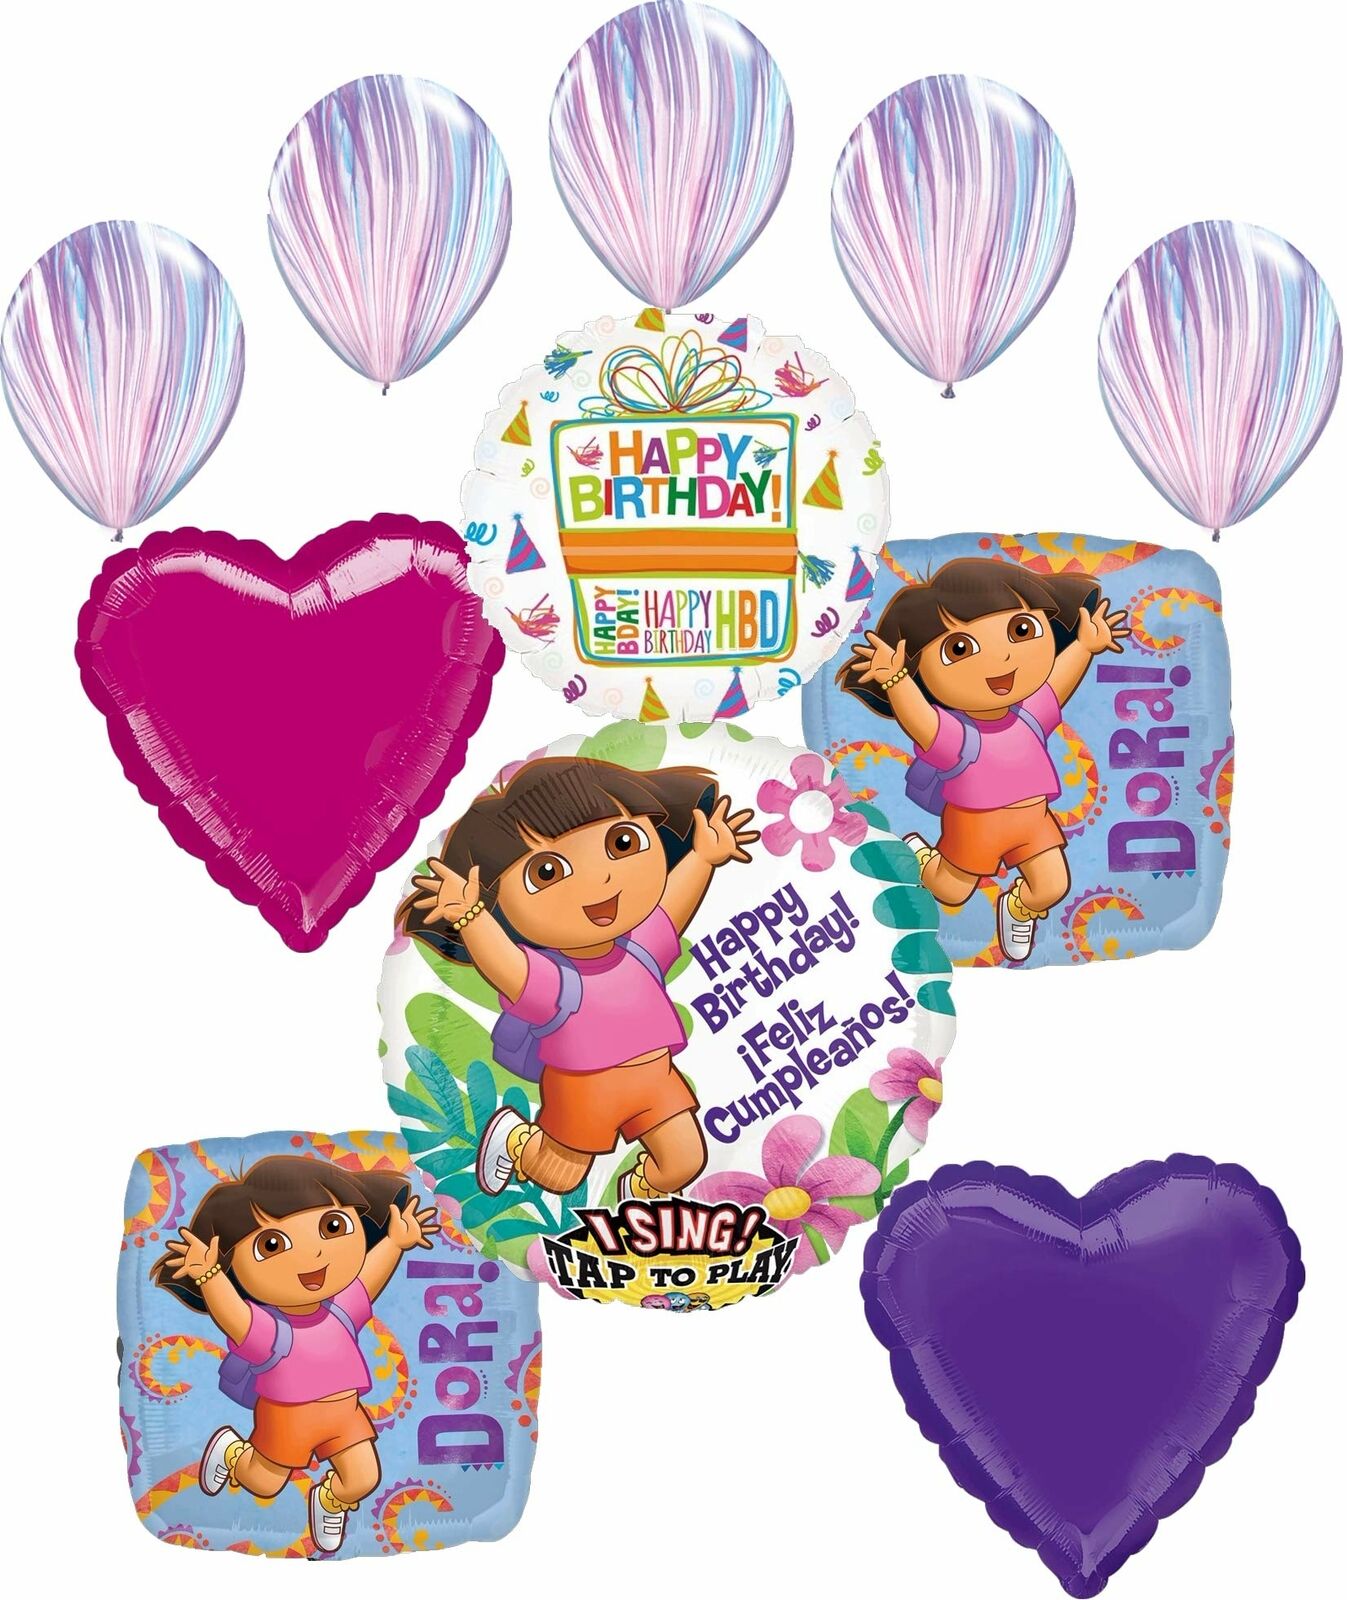 Dora the Explorer 3rd Birthday Party Supplies and Balloon Bouquet Decorations Mayflower